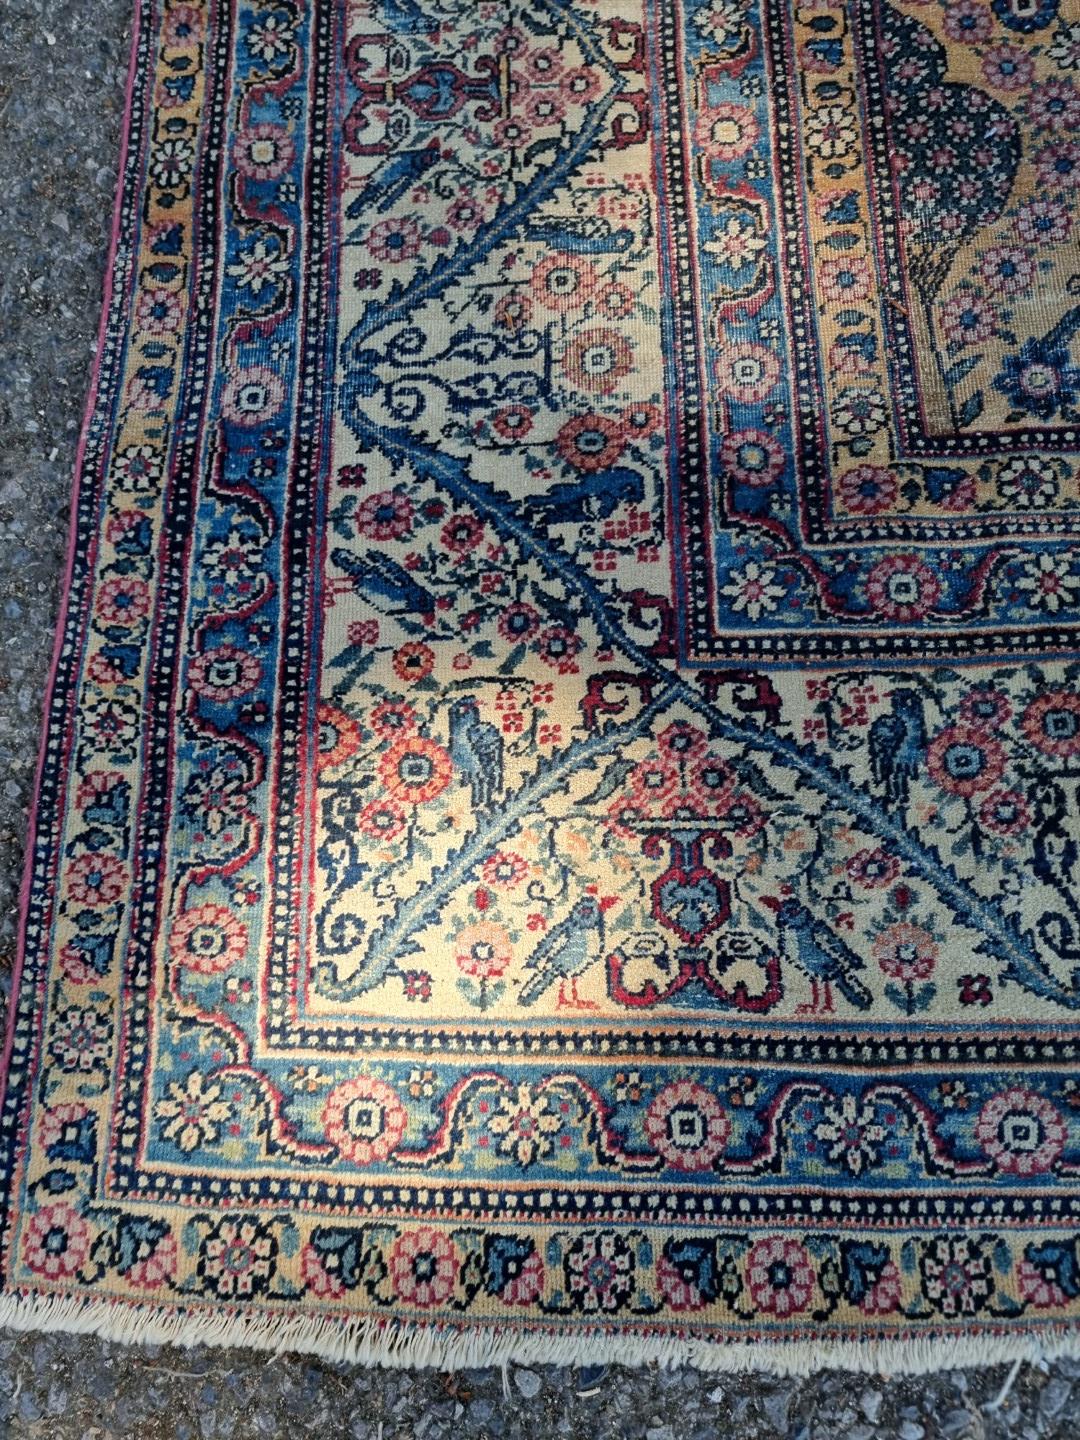 A large Persian rug, having central floral urn, with floral scrolls to side, borders decorated - Image 9 of 20